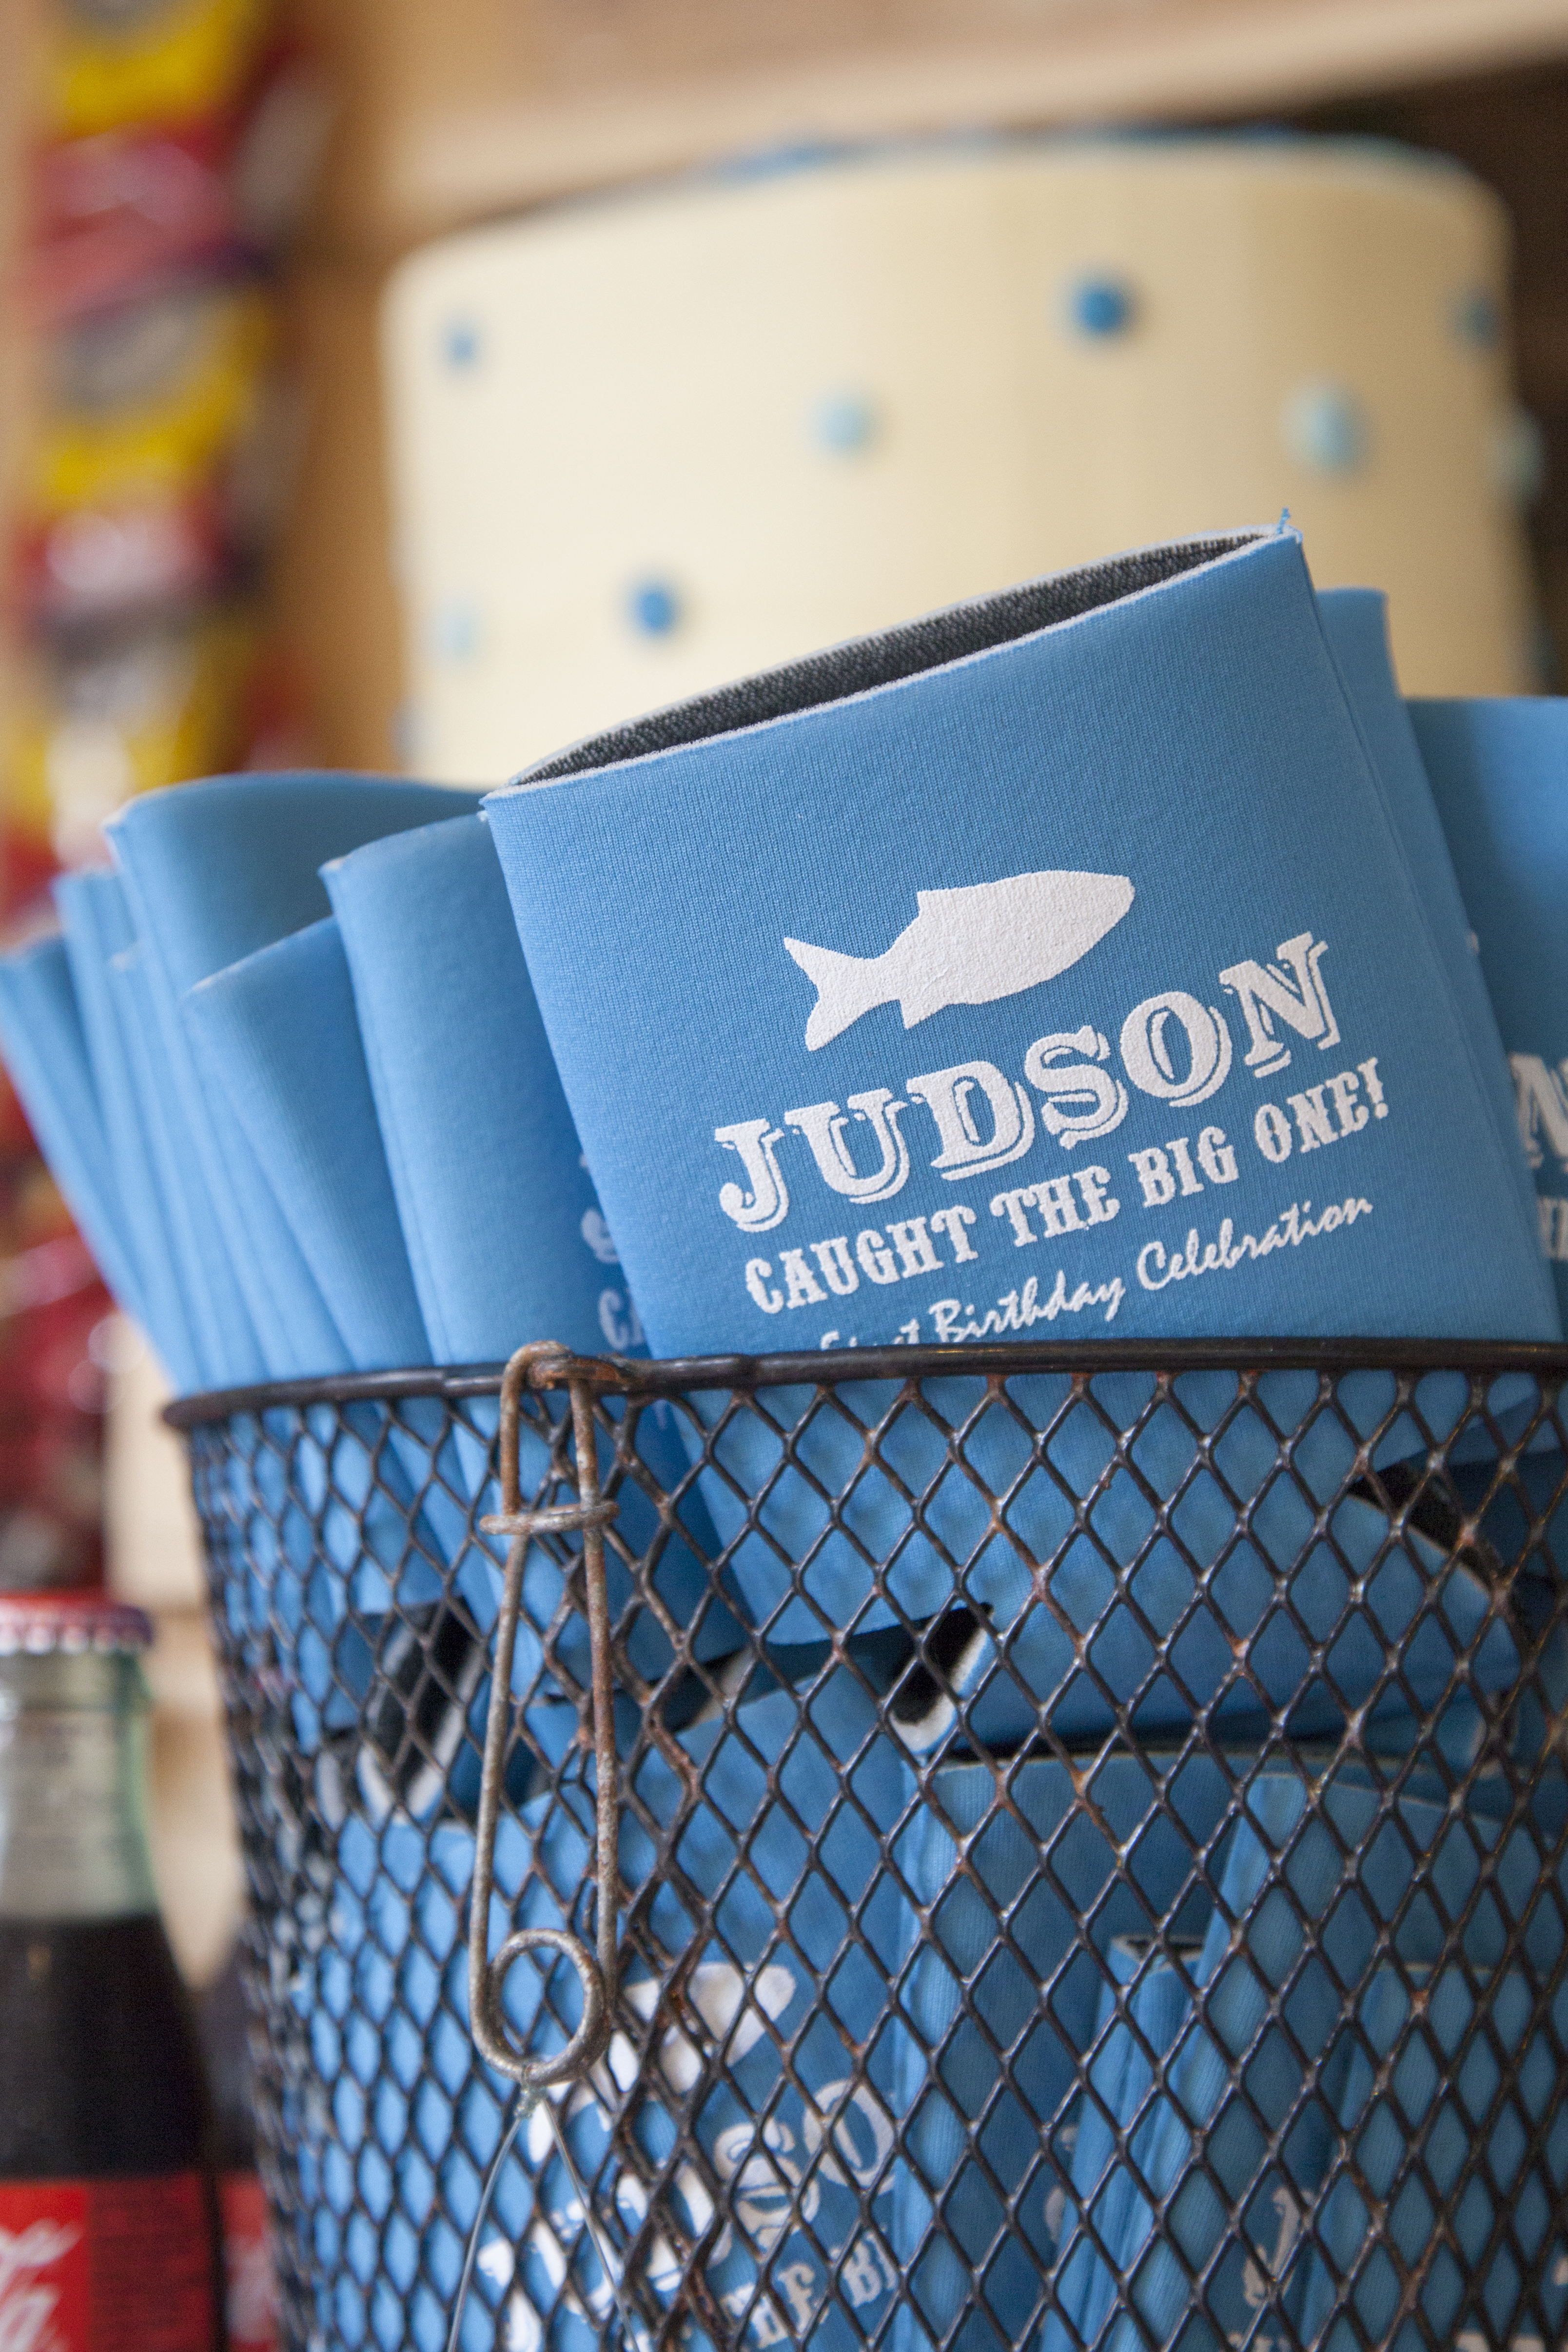 Judson's Bait Shop, a first birthday celebration - Life in the Green House